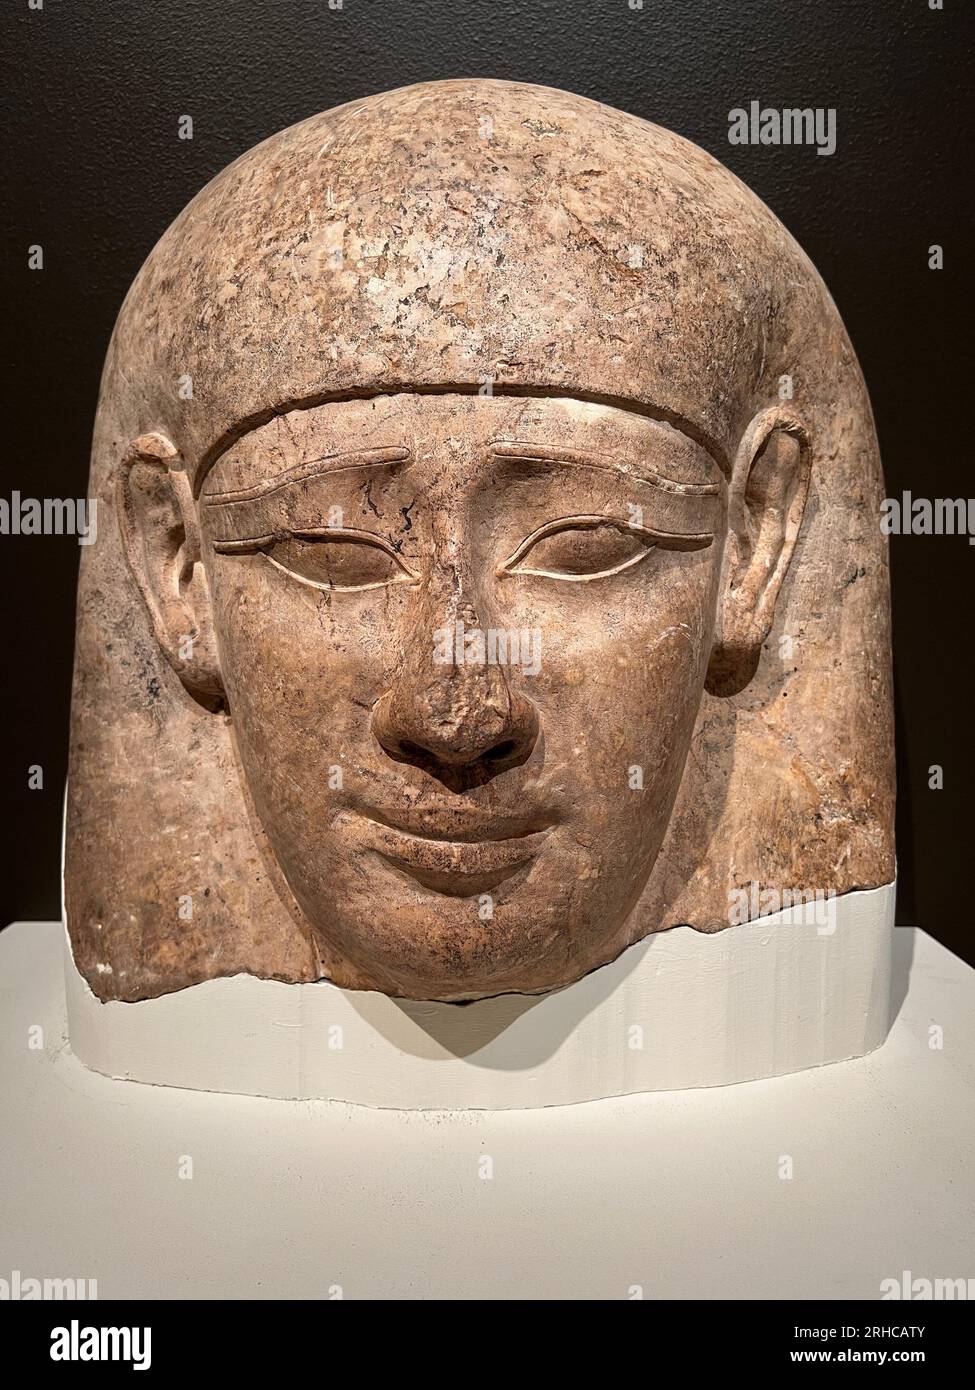 Head from a Sarcophagus Lid, Late Period-Ptolemaic Period, Dynasty 30 or later, 381-30 B.C.E. Limestone.  Brooklyn Museum, NYC Stock Photo